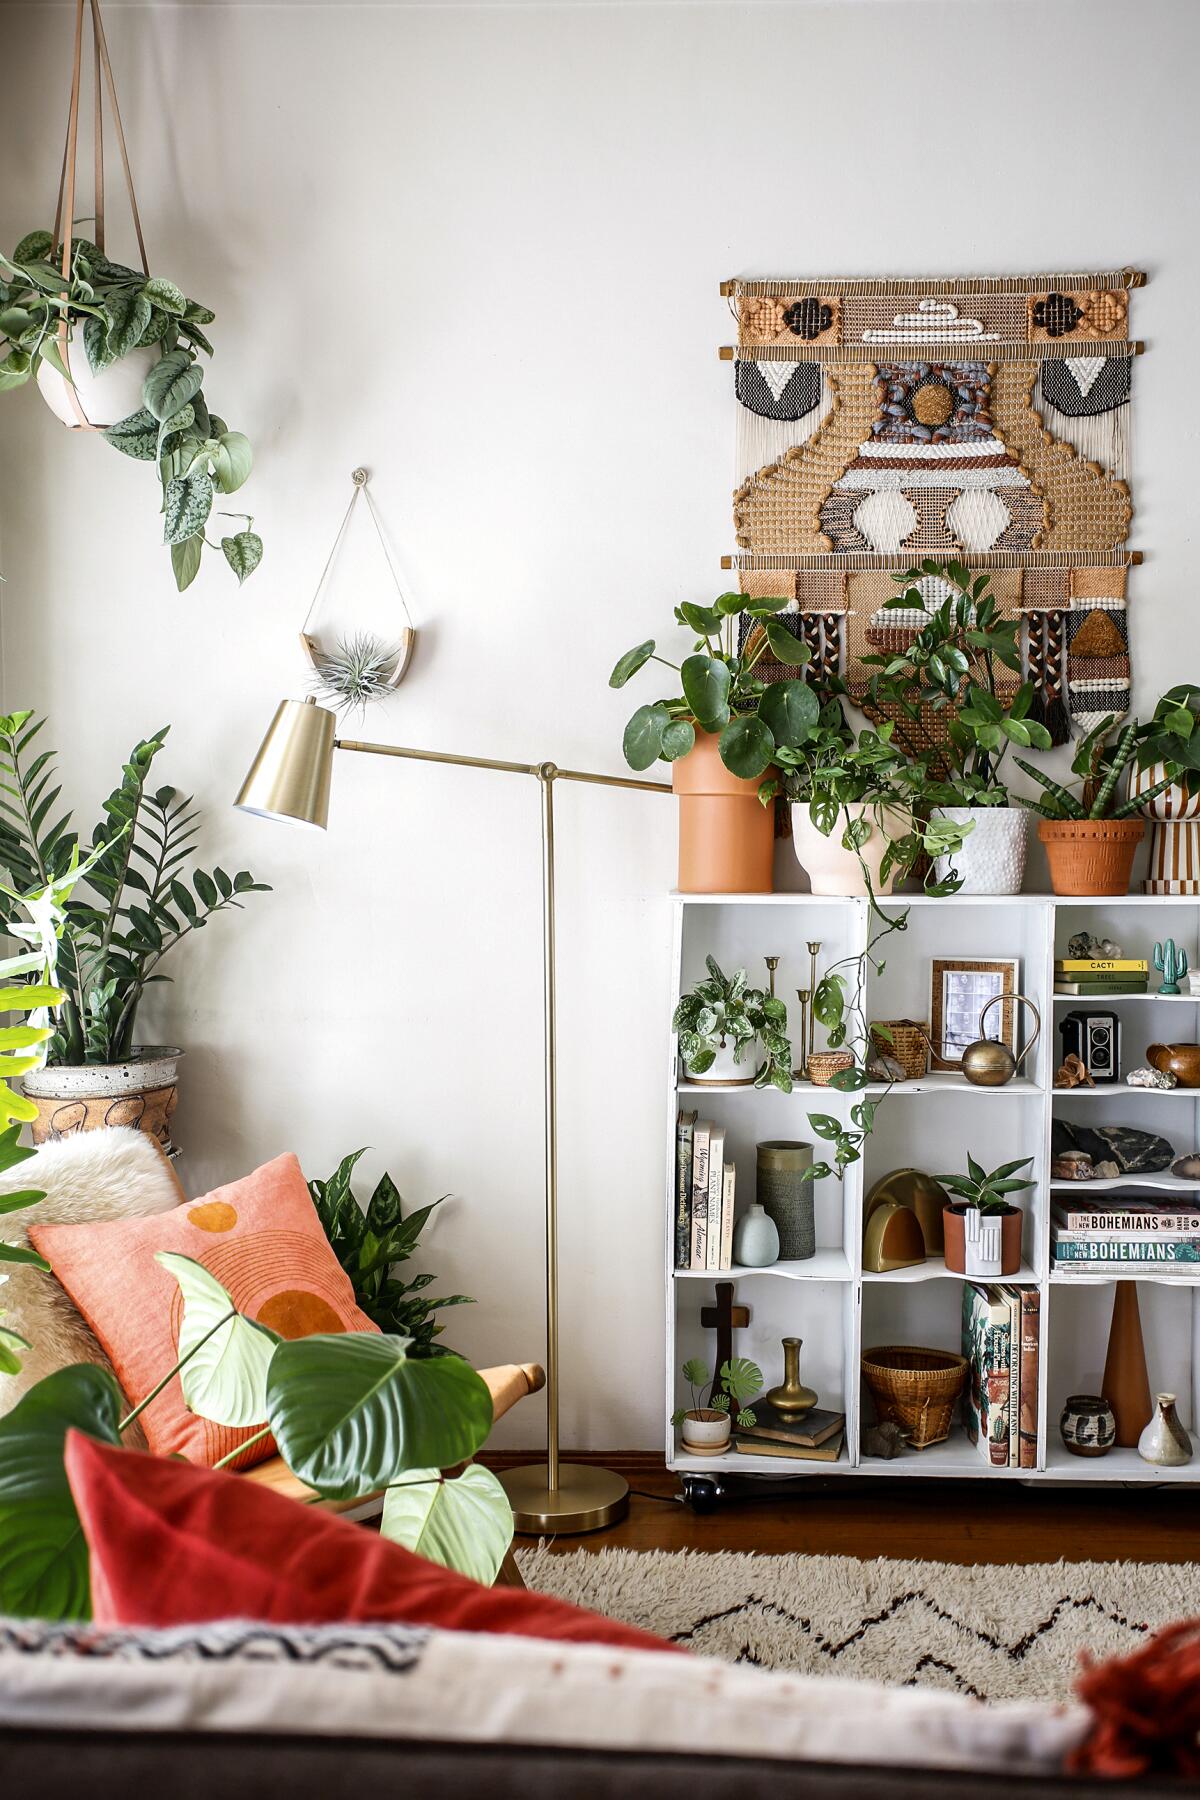 A sunny living room with plants hanging and on bookshelves